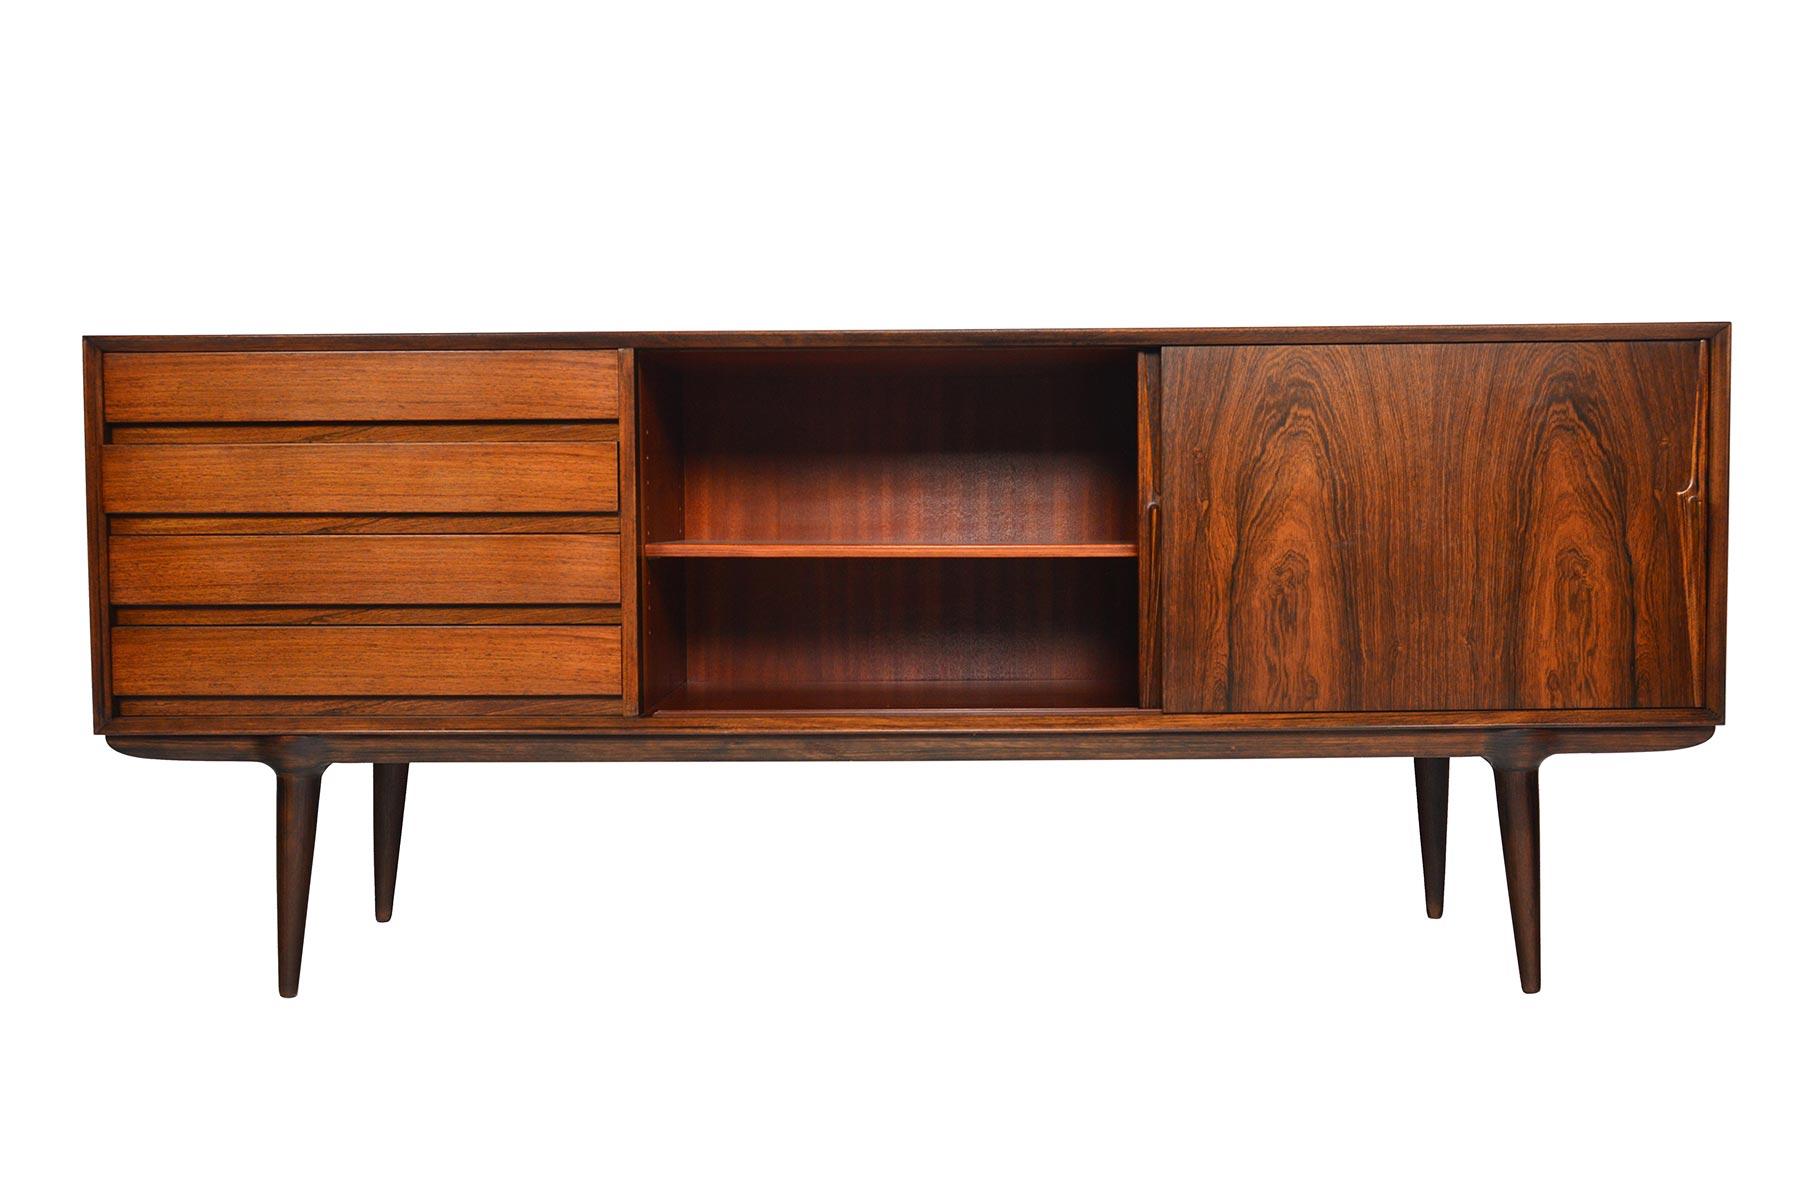 Large Danish modern midcentury rosewood Model #18 credenza designed by Gunni Omann for Omann Jun Møbelfabrik. Perfectly proportioned, with a low profile design, this piece will work well with any modern decor. Doors accented by beautifully hand